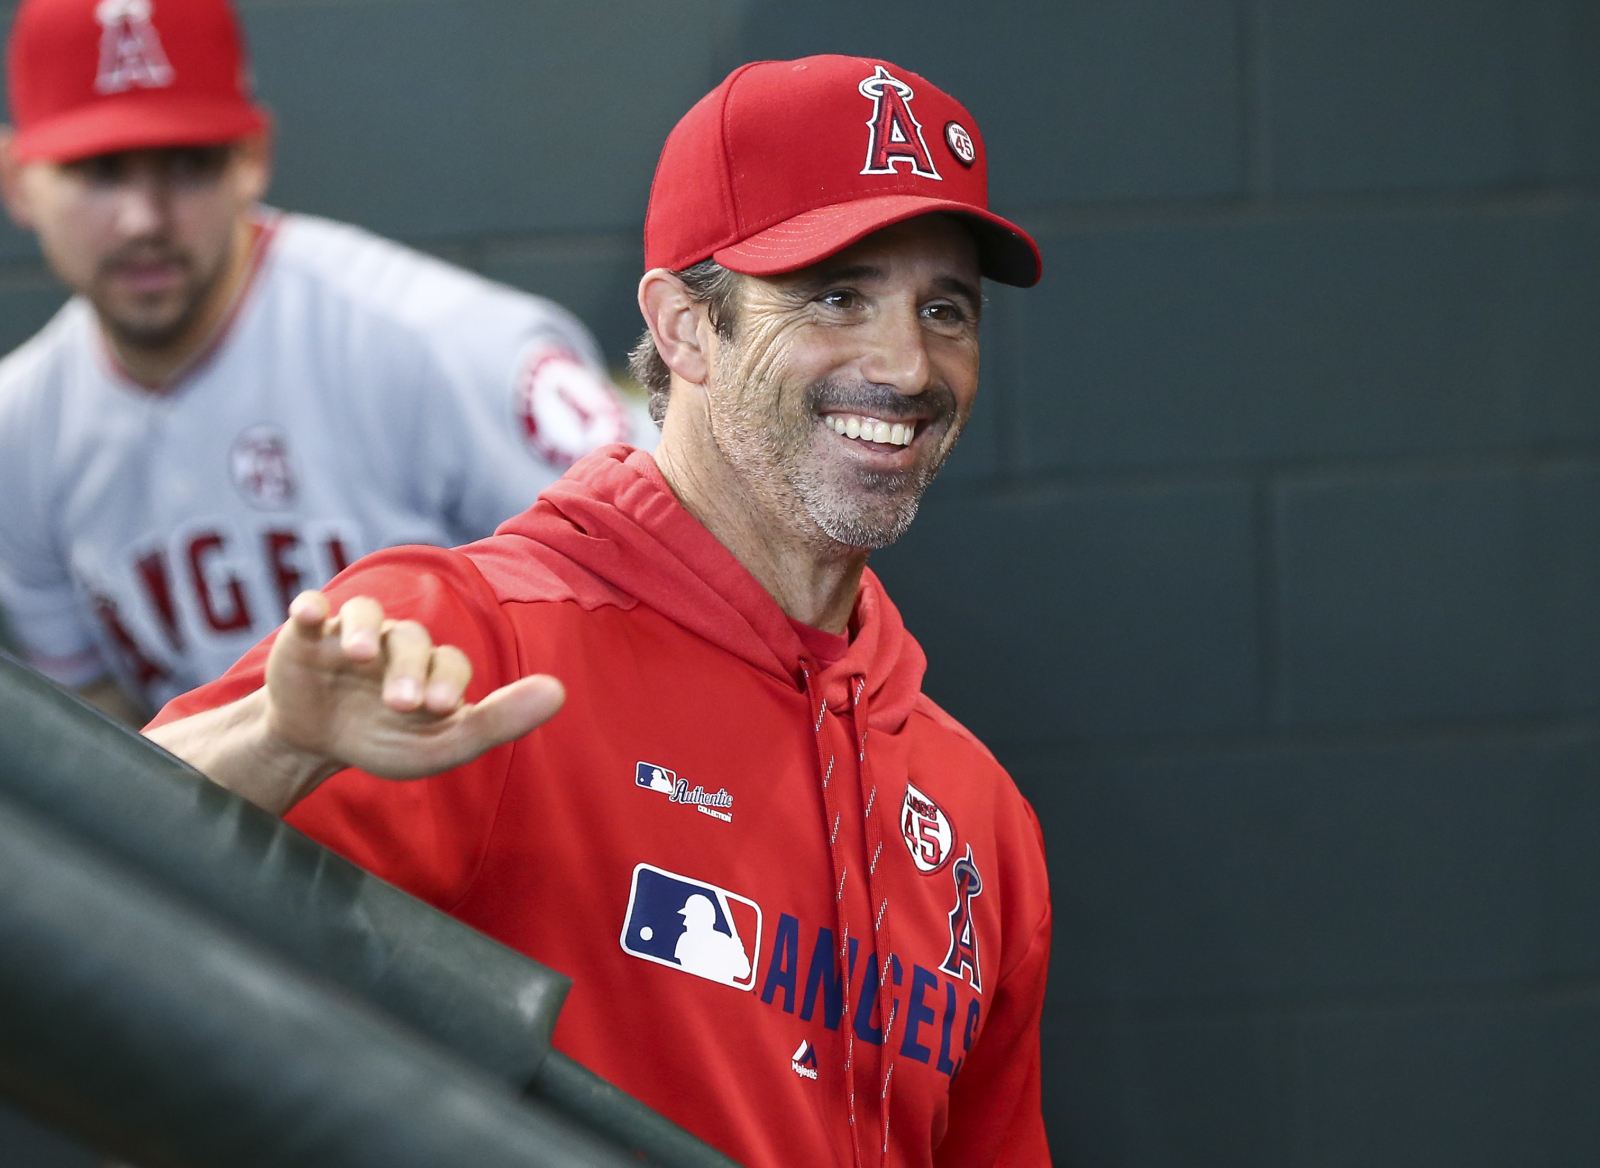 Brad Ausmus hired as Angels manager